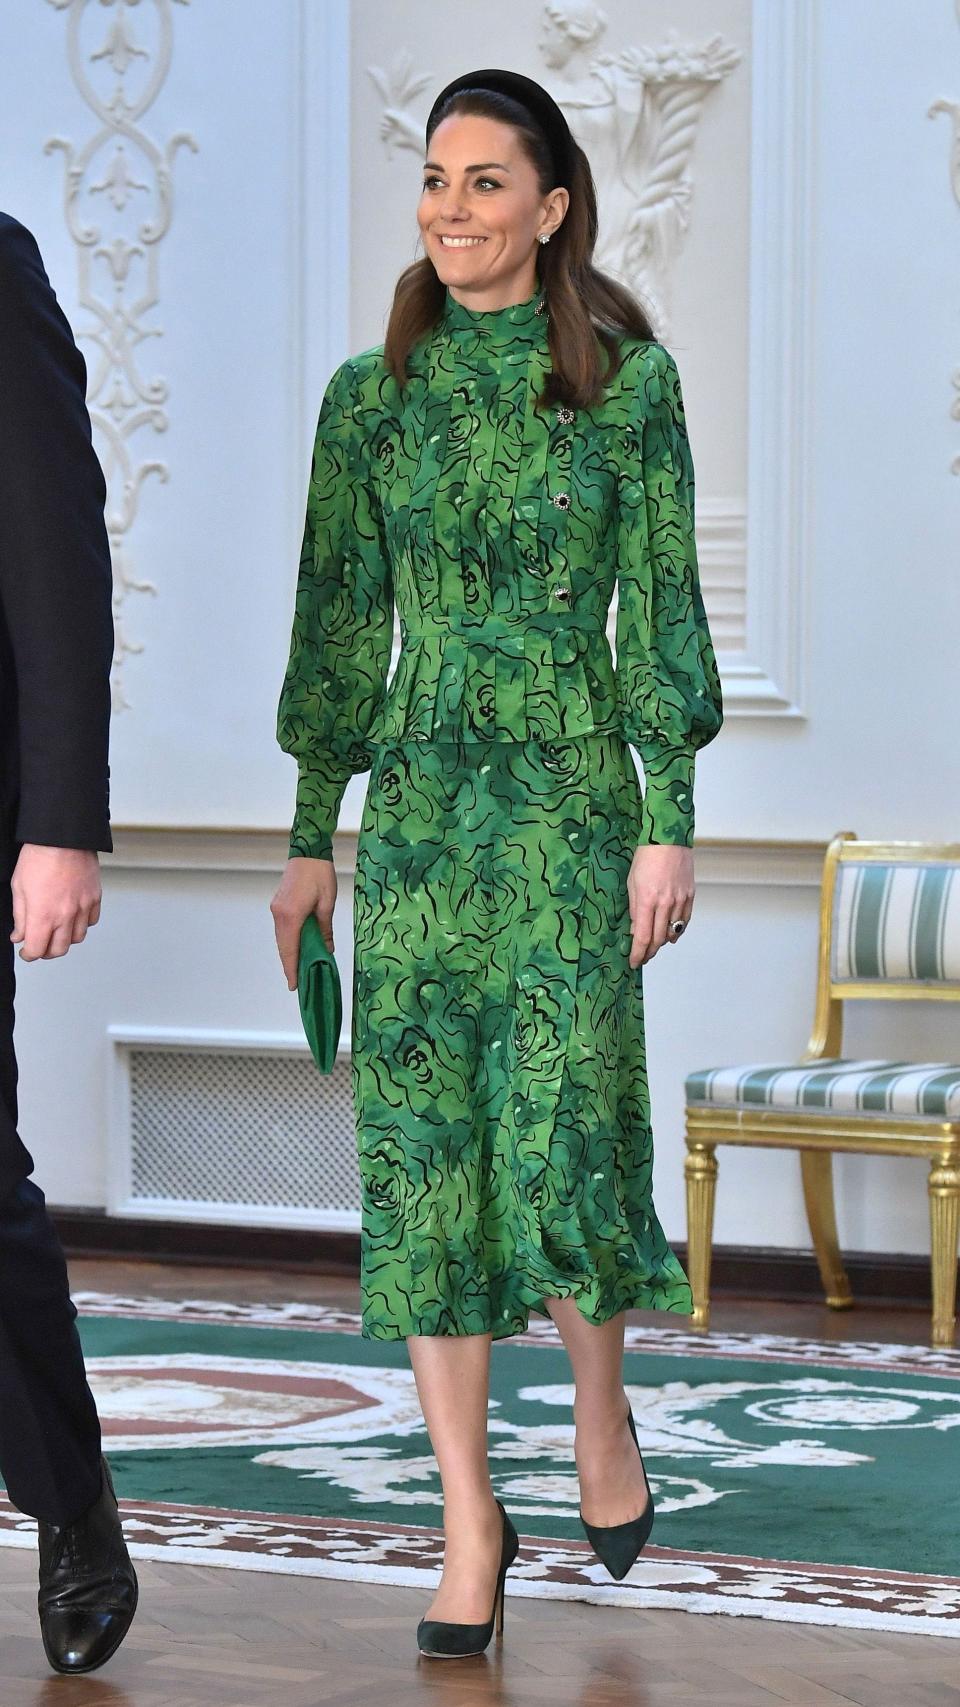 Kate Middleton arrives for a meeting with the President of Ireland at Áras an Uachtaráin on March 3, 2020